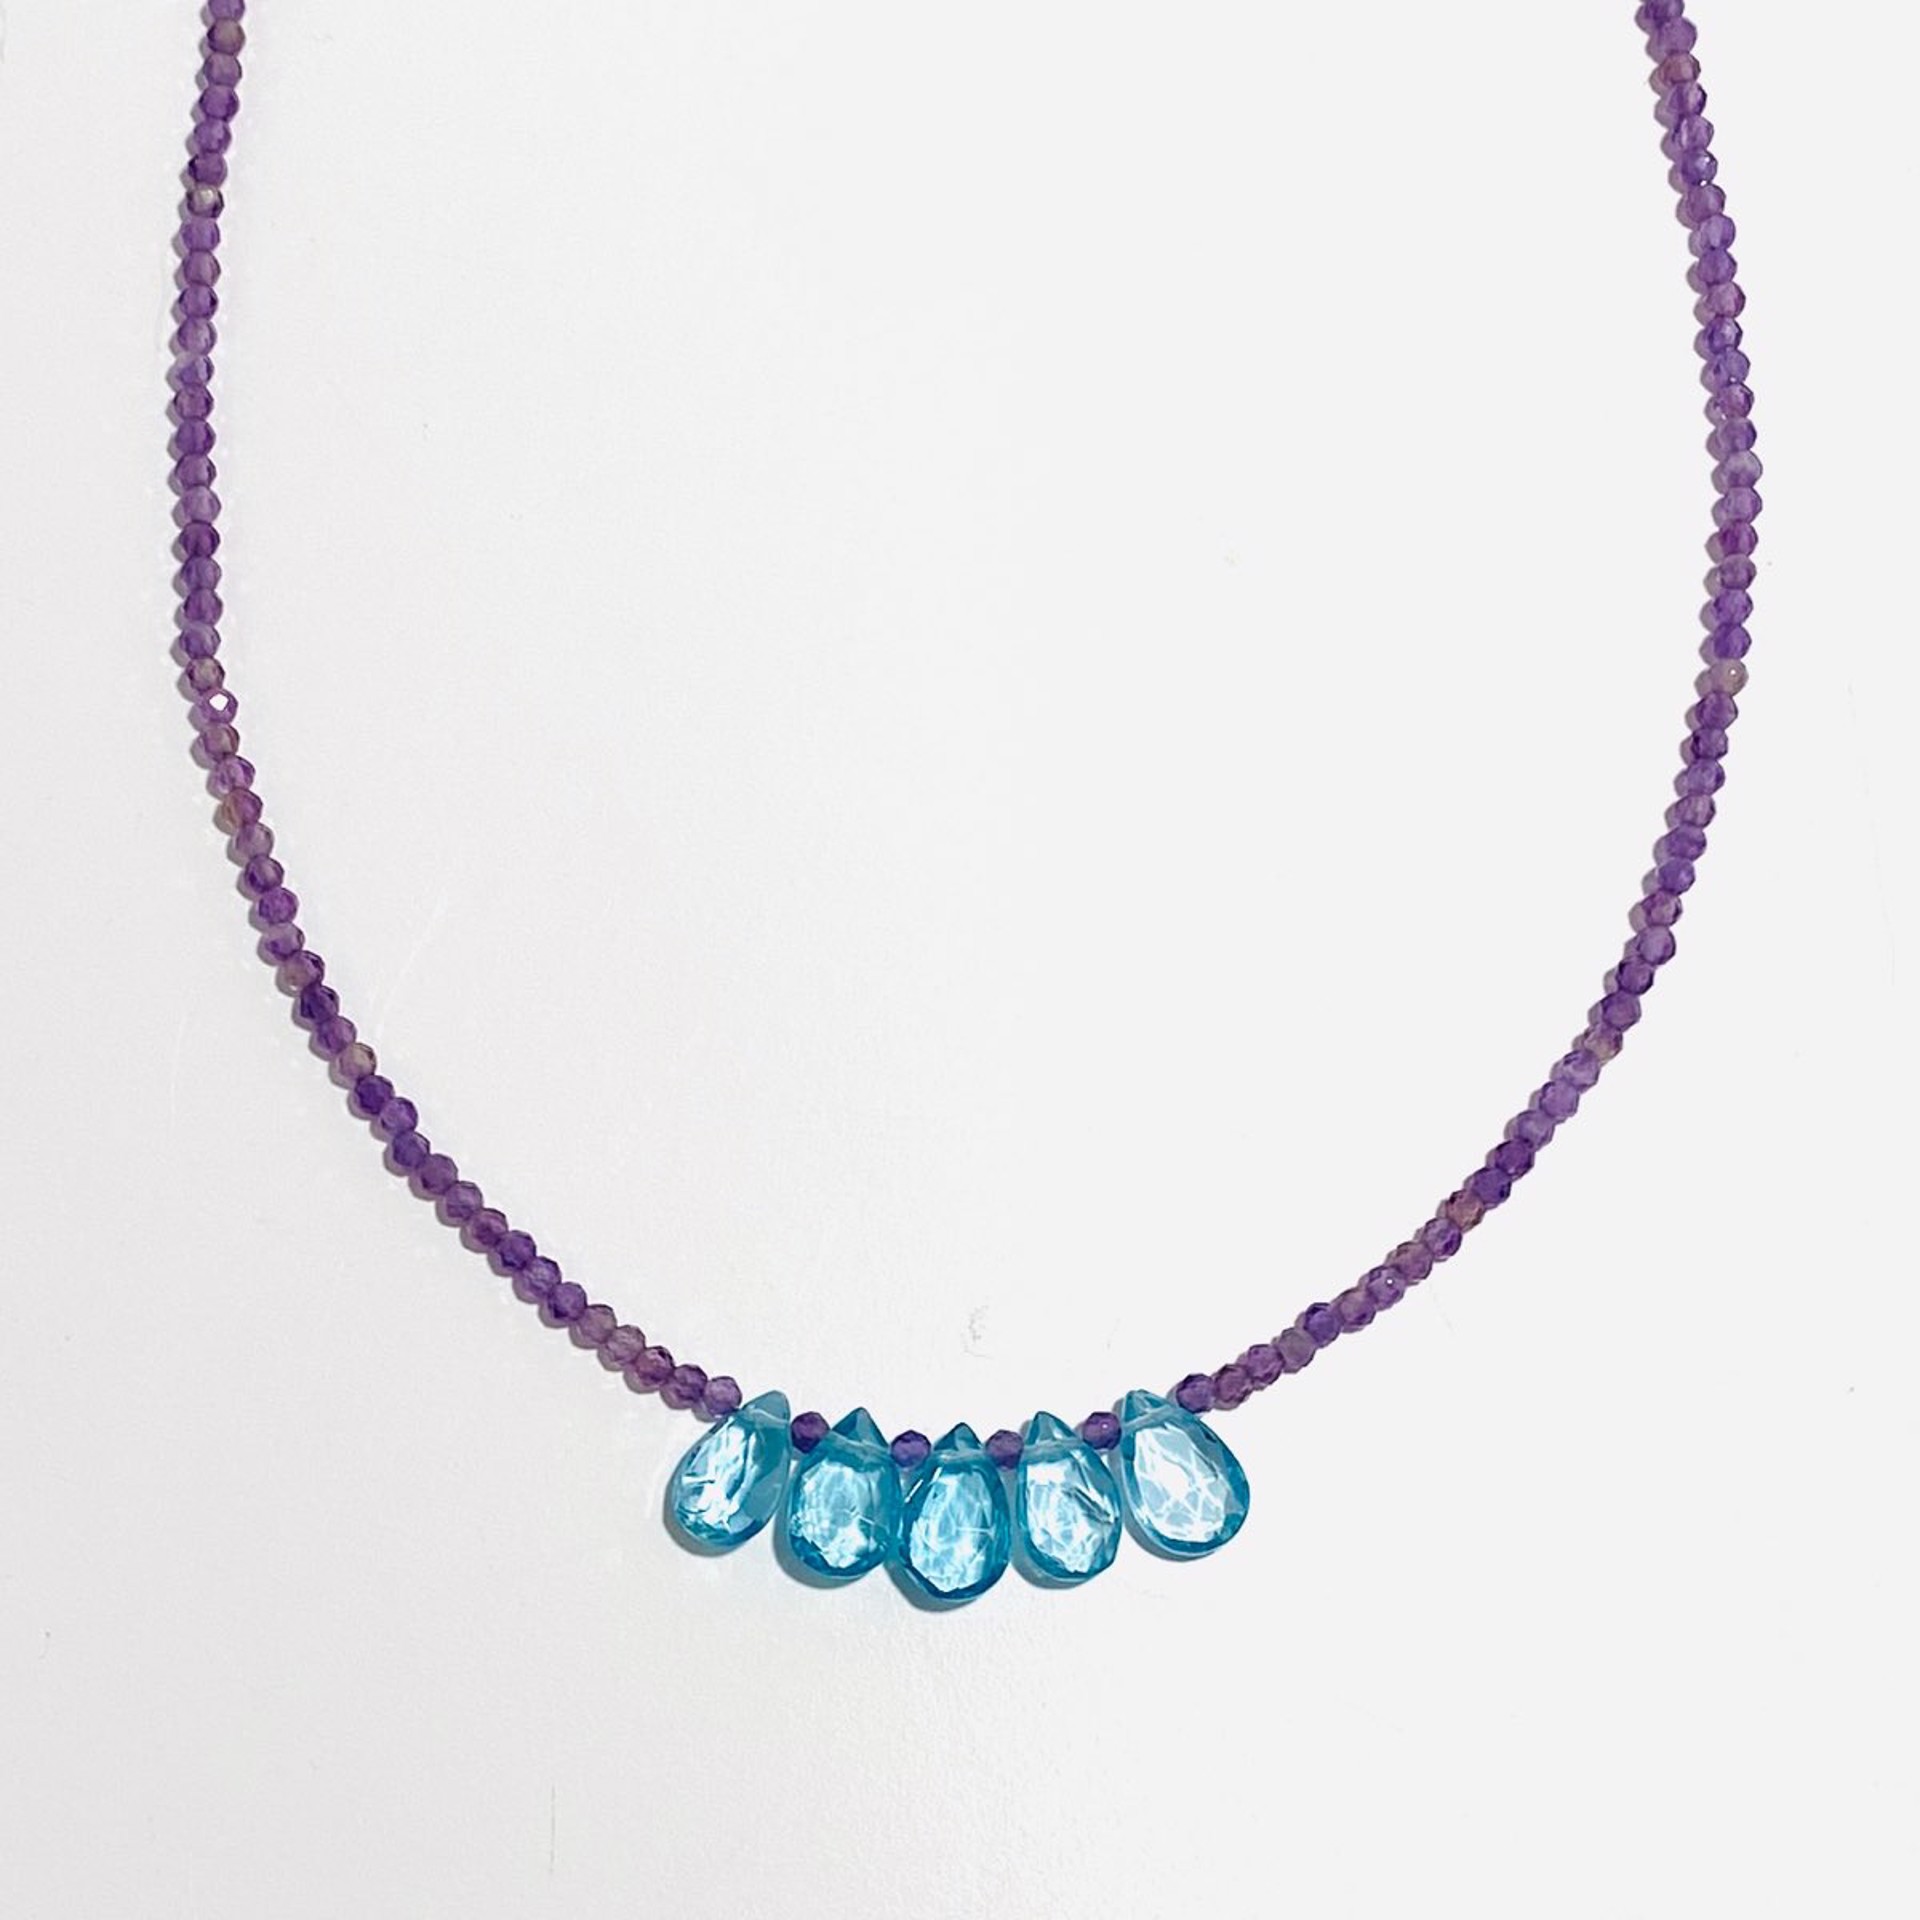 Tiny Faceted Amethyst Five Blue Apatite Brio Necklace NT22-214 by Nance Trueworthy